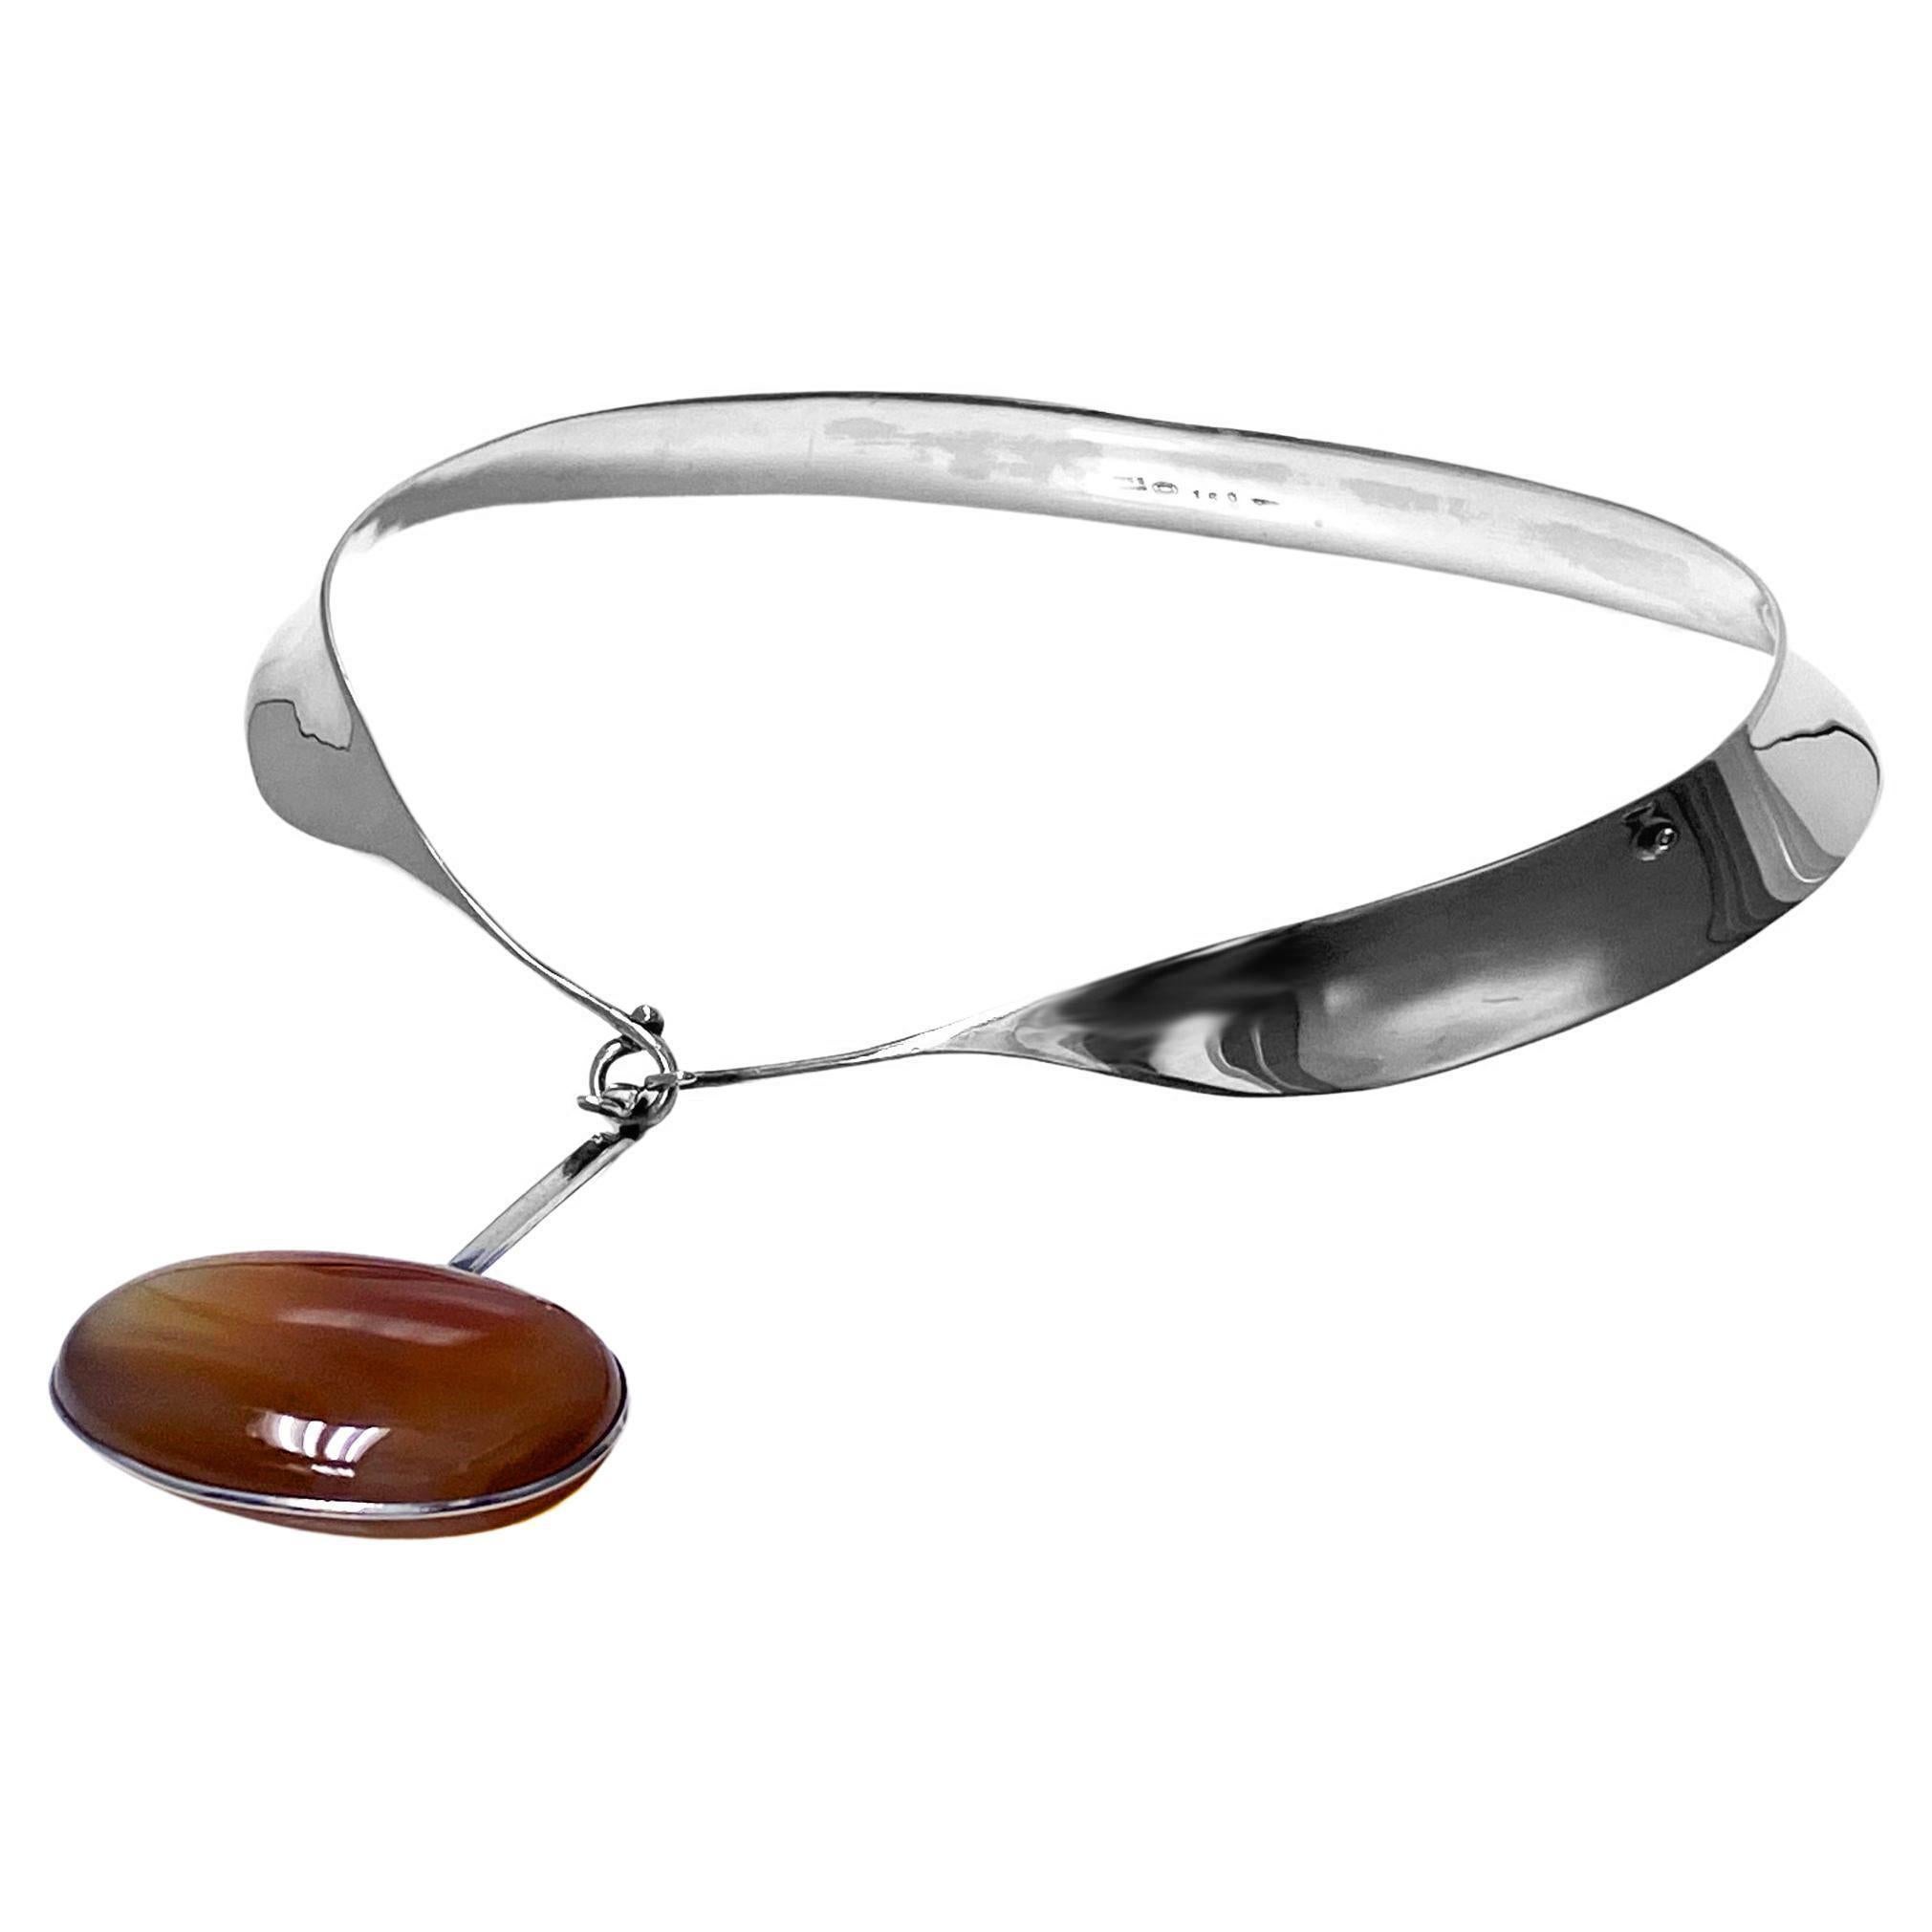 Vivianna Torun Bulow Hube for George Jensen, a rare Sterling Silver Necklace with reddish brown banded agate detachable pendant on collar, Denmark, C. 1975, stamped Georg Jensen in a dotted oval, Denmark, Torun, 133 pendant and 160 collar and 925S.